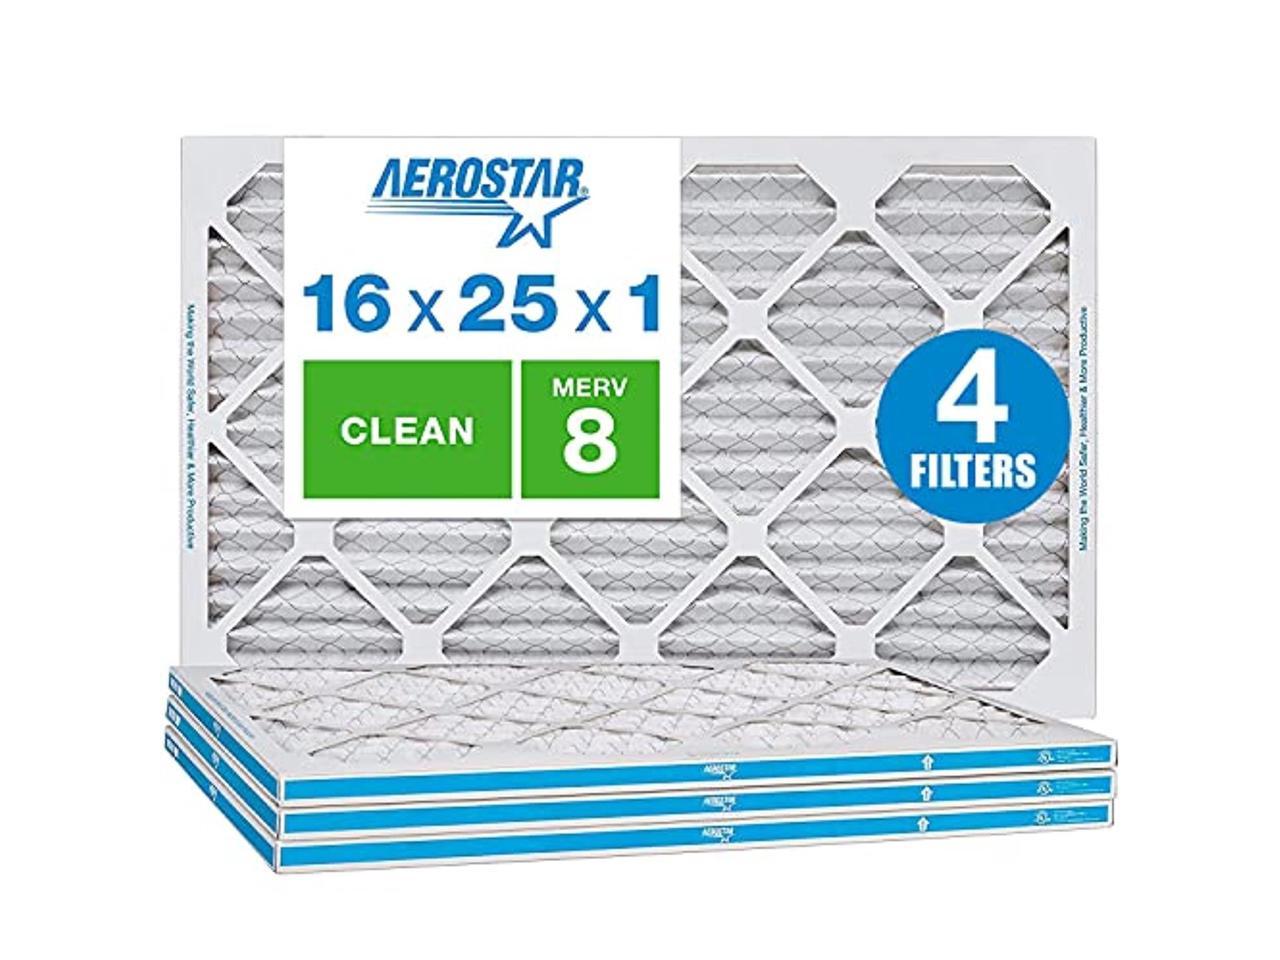 4 LARGE ACCUMULAIR GOLD MERV 8 HOME FURNACE AIR FILTERS PLEATED ALLERGEN 